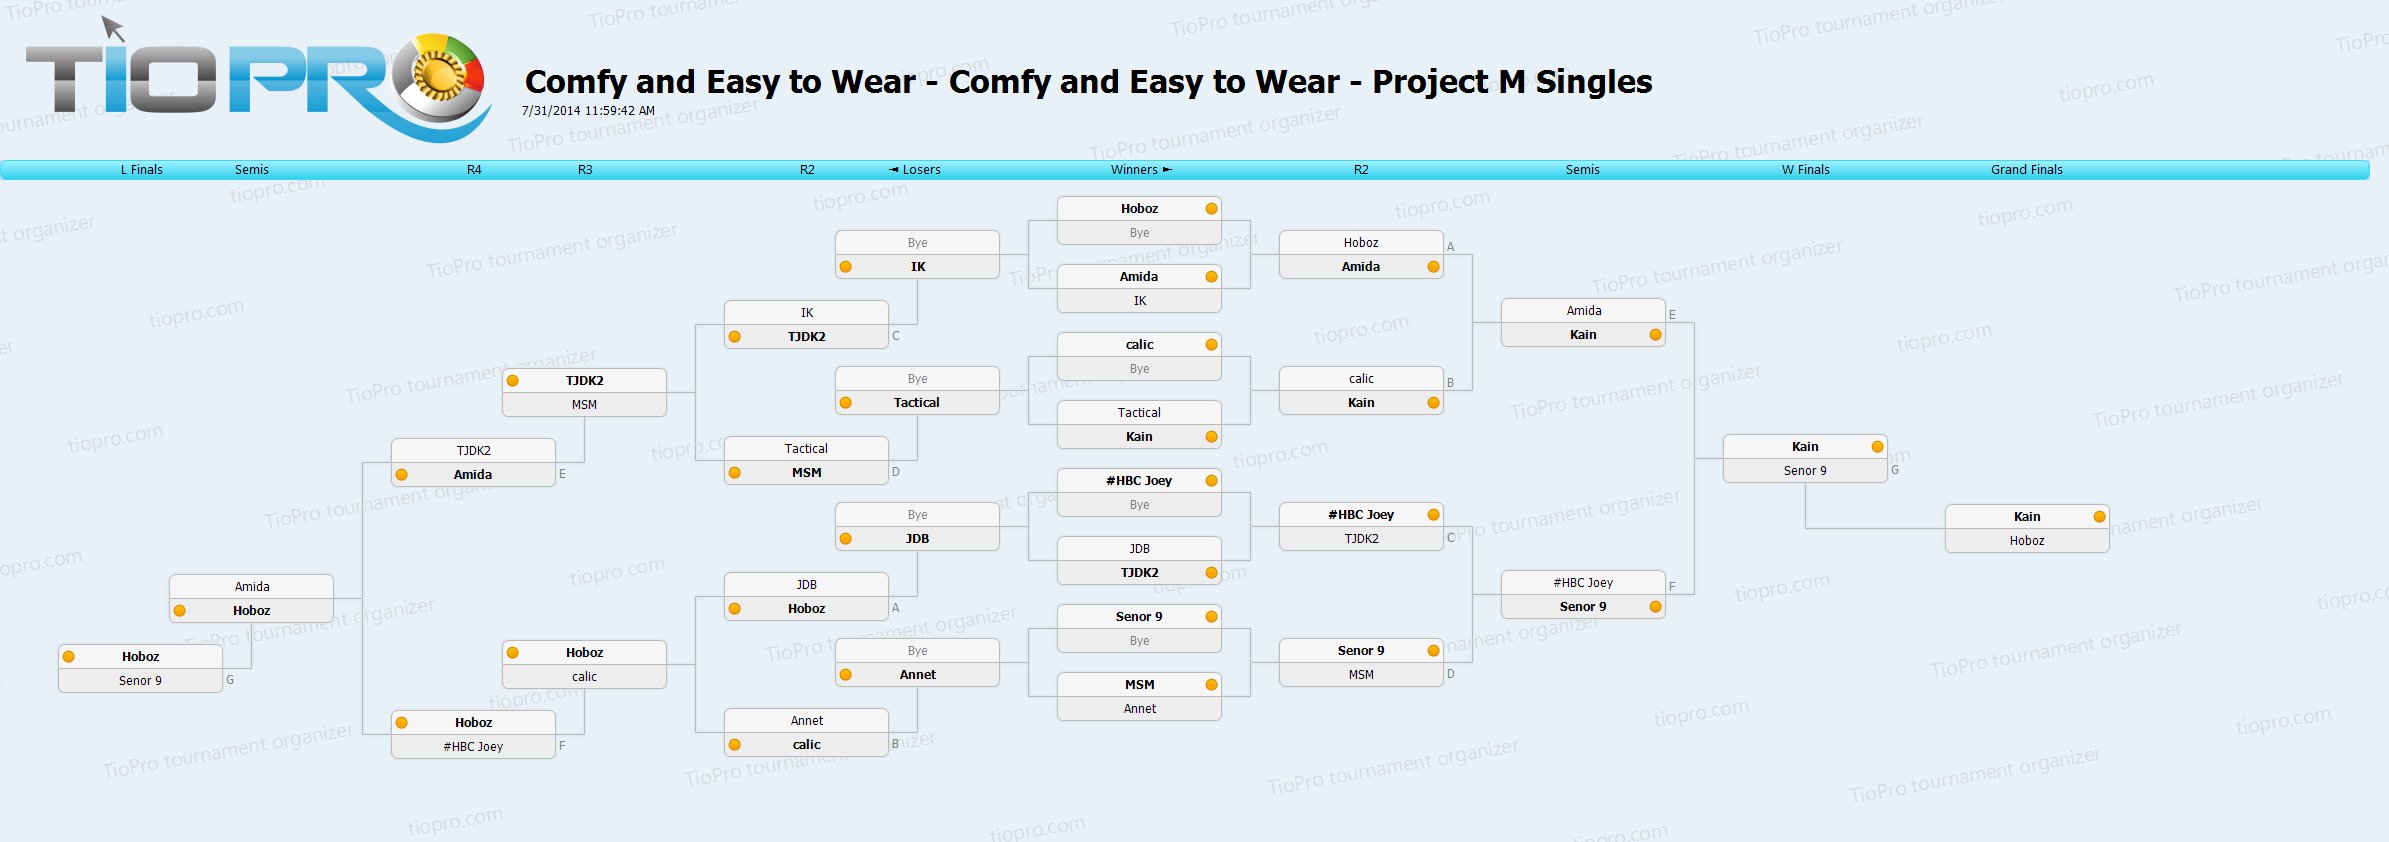 Comfy and Easy to Wear - Project M Singles